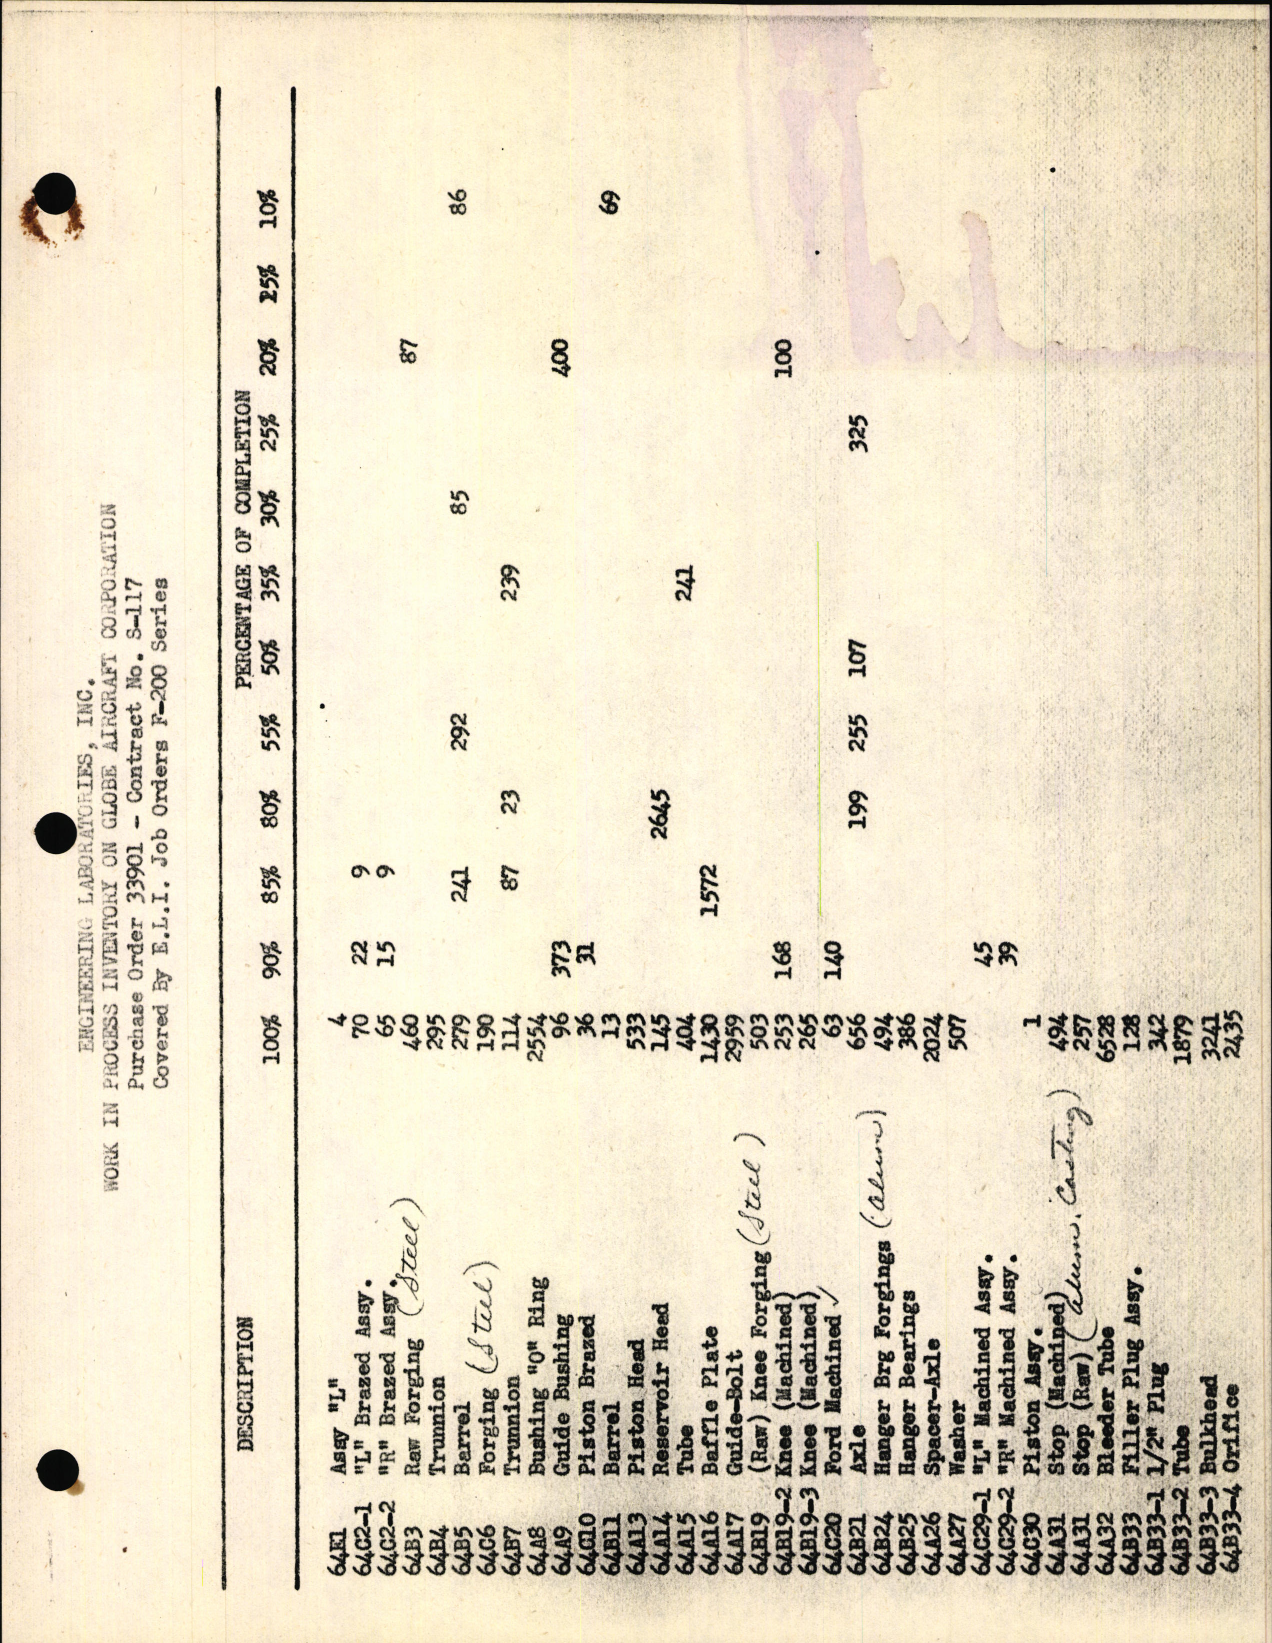 Sample page 5 from AirCorps Library document: Globe Strut Inventory and Tooling Fixtures List